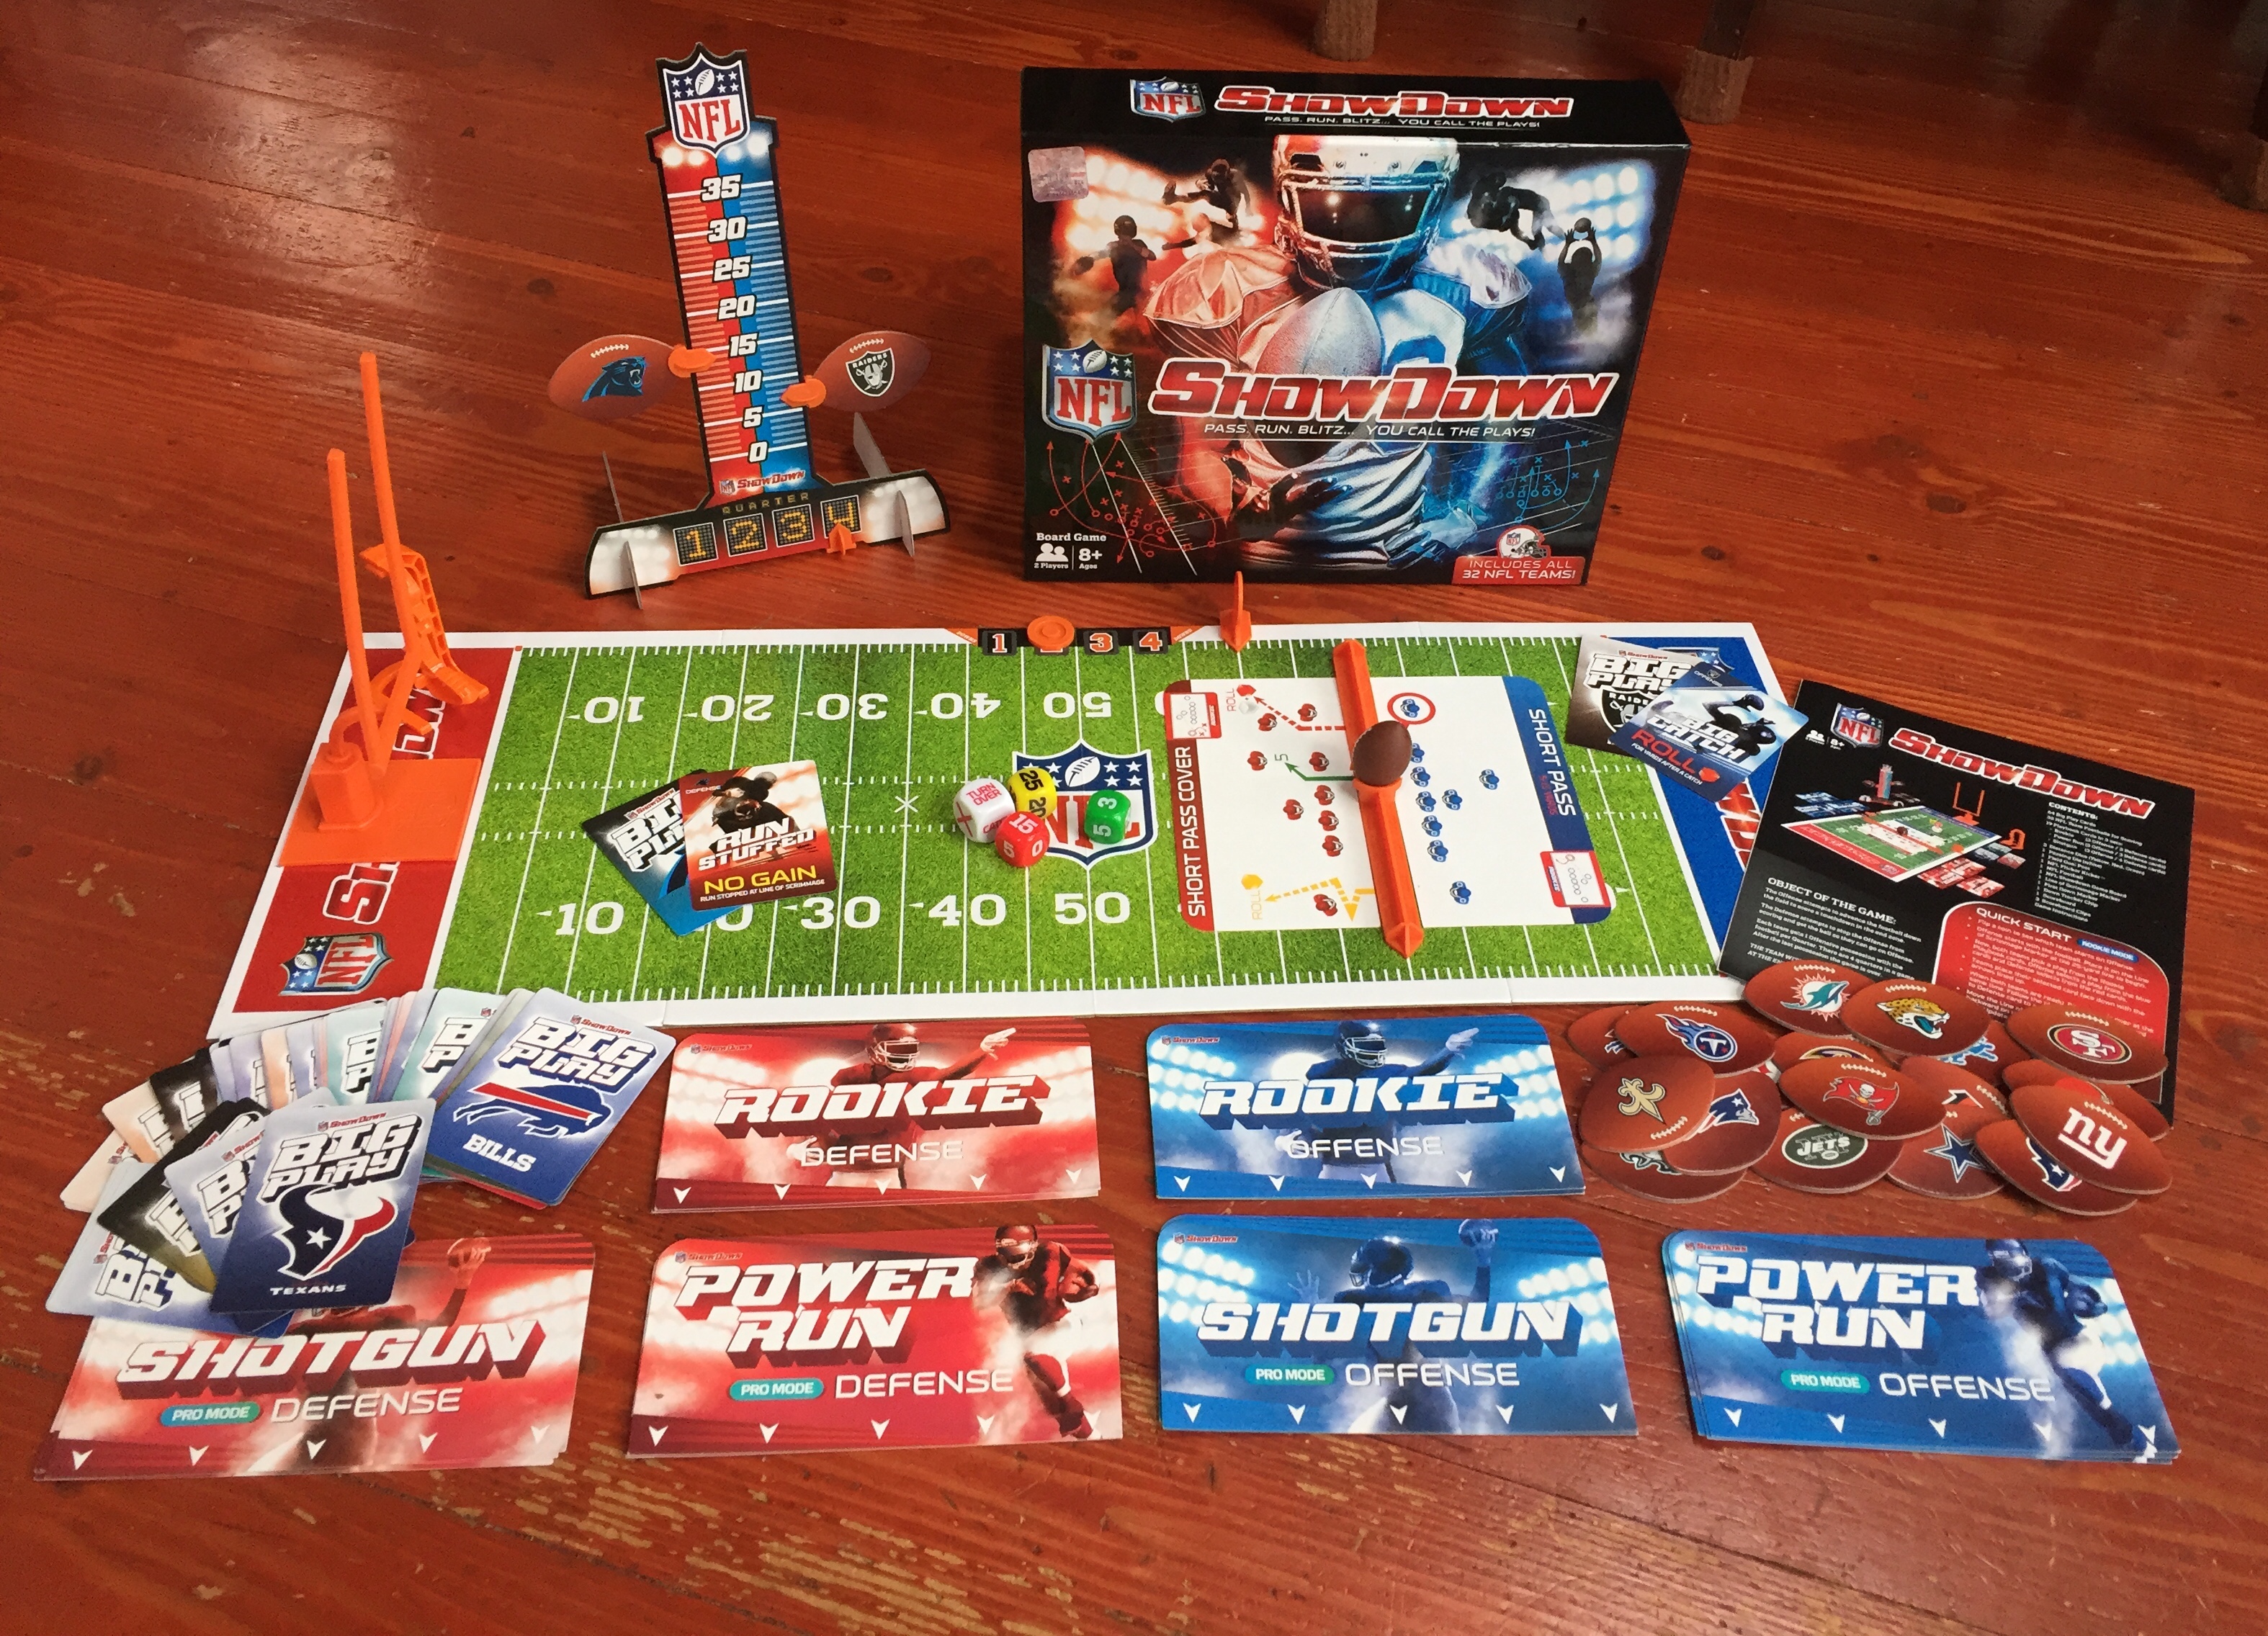 NFL Showdown football board game set up for play